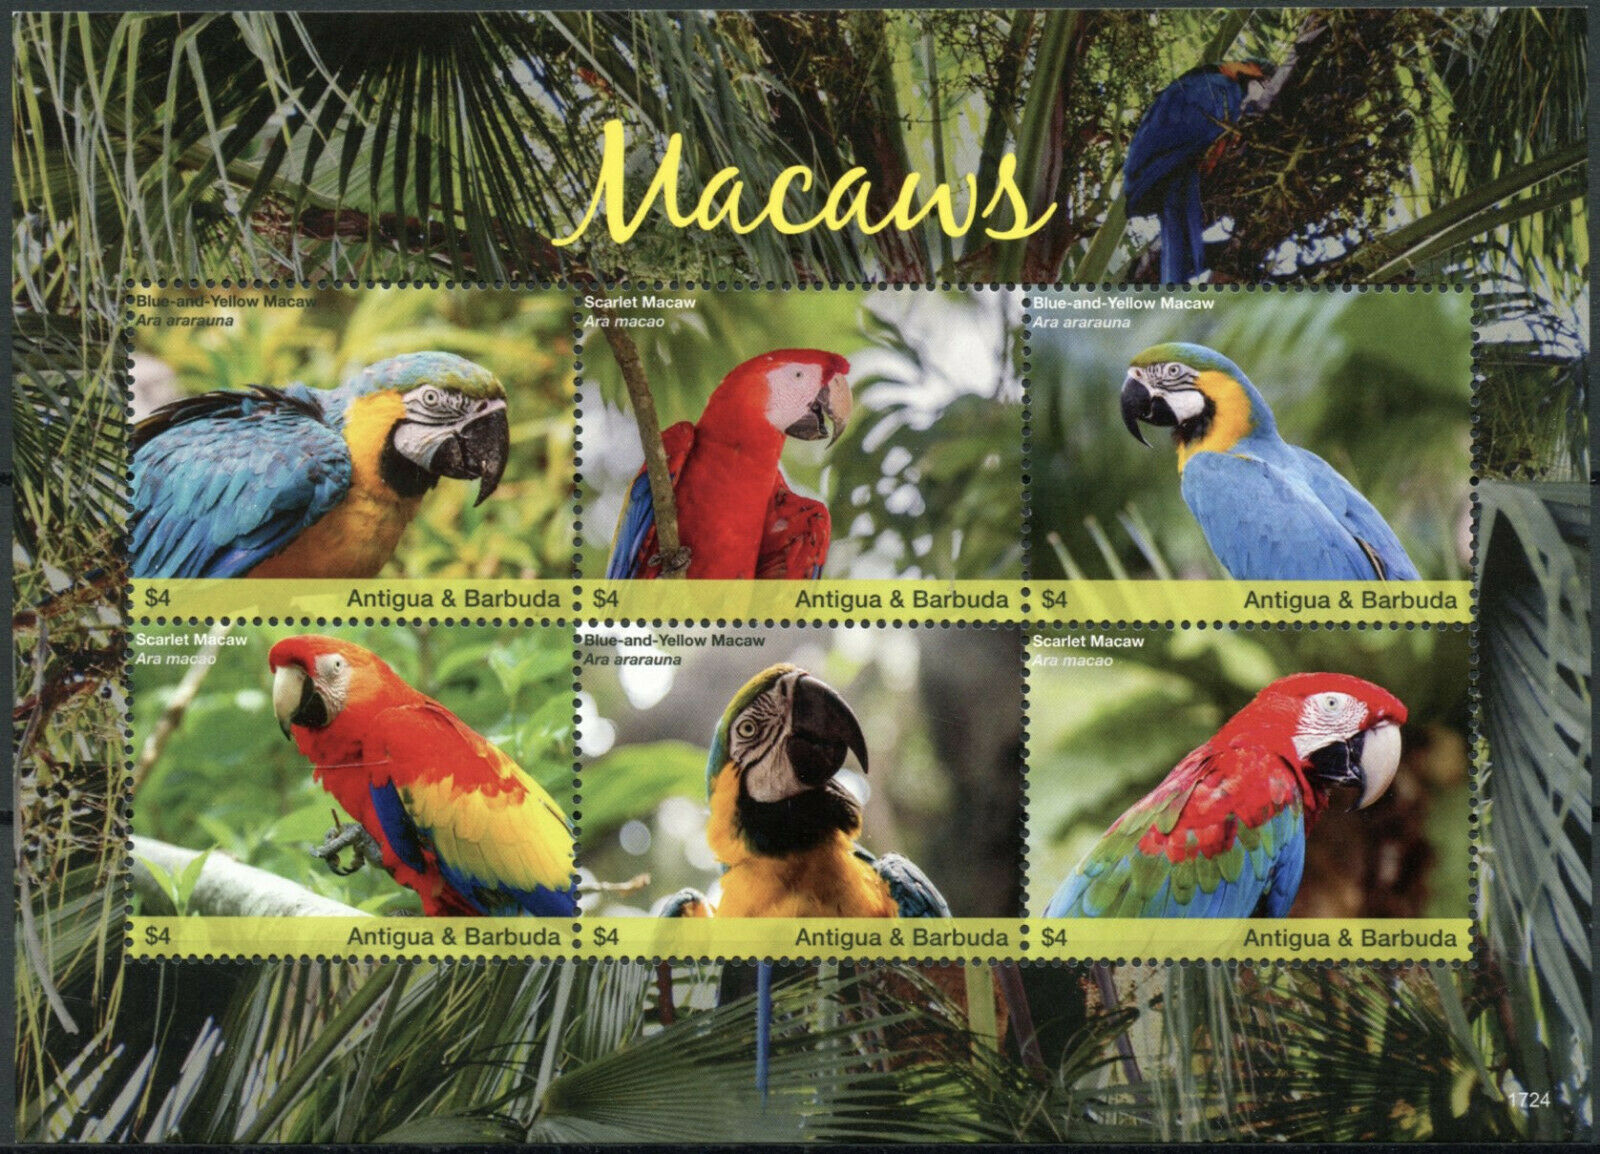 Antigua & Barbuda 2017 MNH Birds on Stamps Macaws Scarlet Macaw Parrots 6v MS II